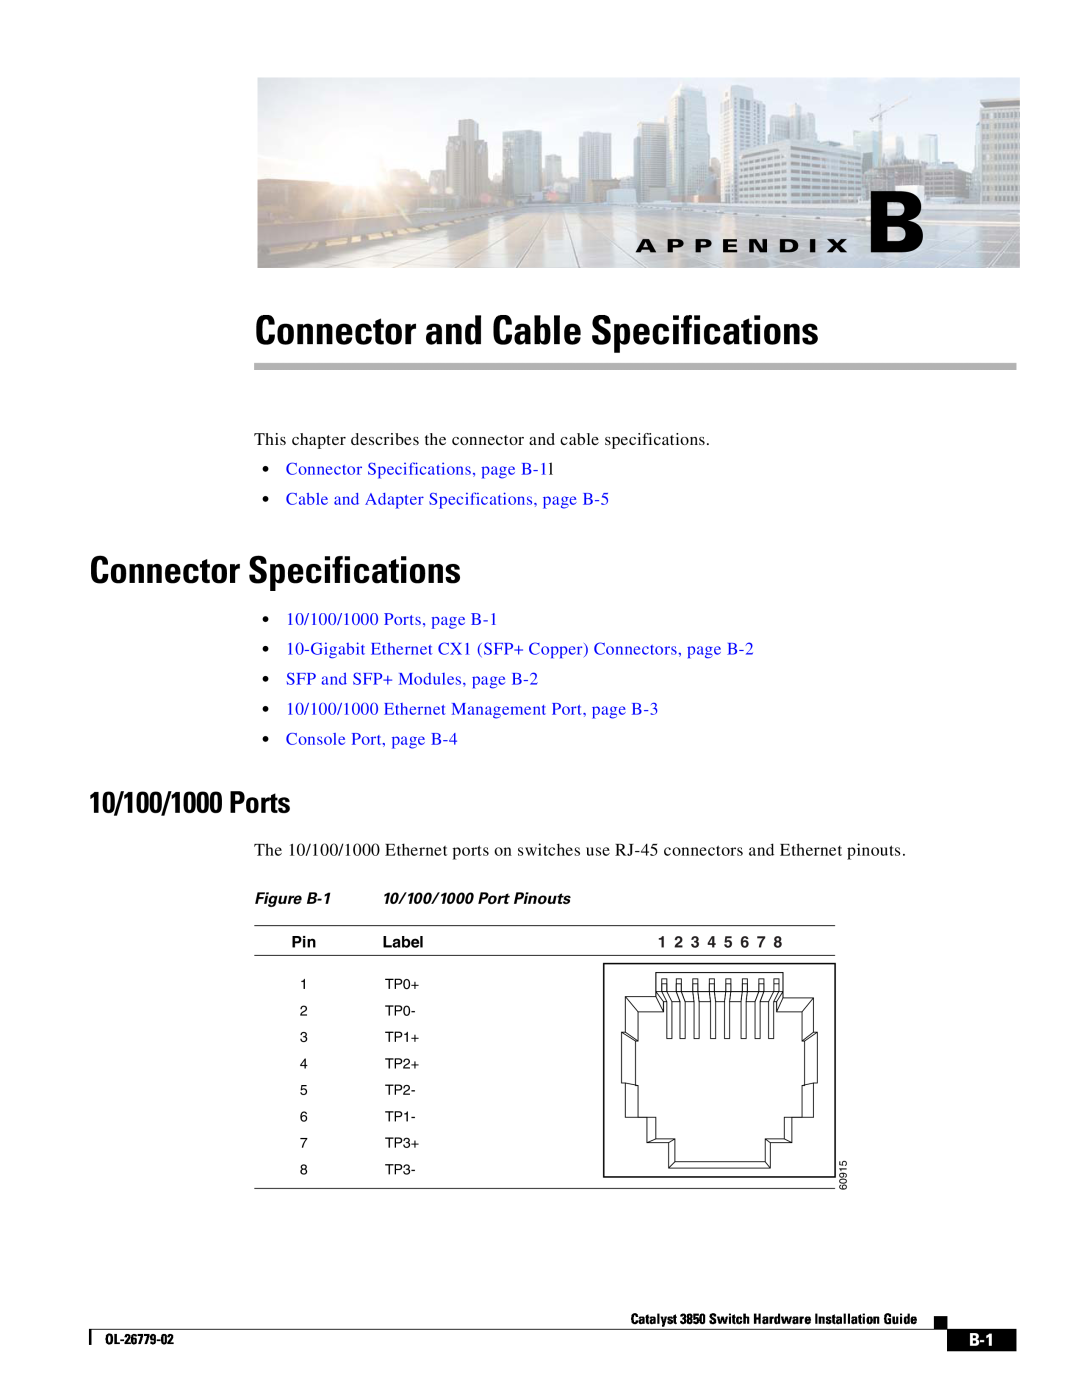 Cisco Systems C3850NM210G, WSC385024TS Connector and Cable Specifications, Connector Specifications, 10/100/1000 Ports 